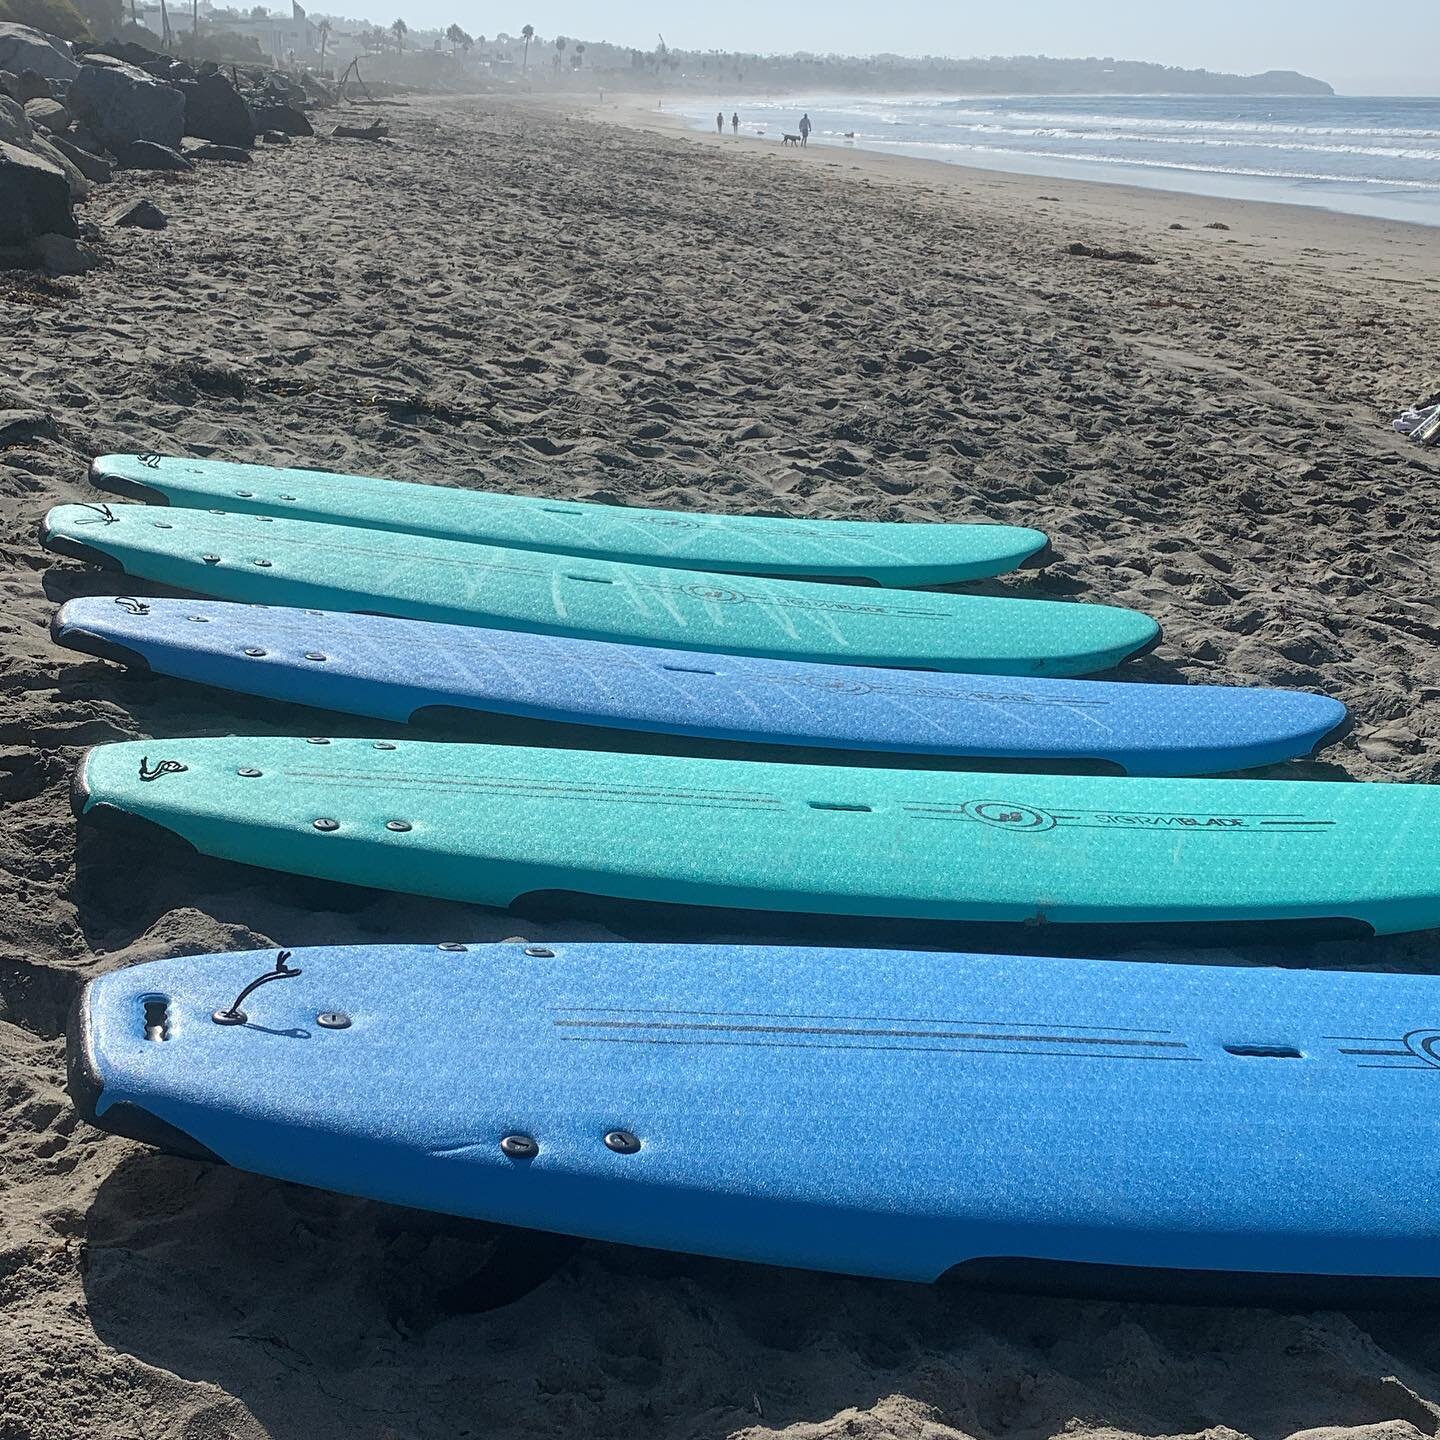 Waves are fun and the waters warm! Book a lesson on our website for this week / weekend! #malibu #malibusurf #surflessons #malibusurflessons #la #cali  #malibu #malibubeach